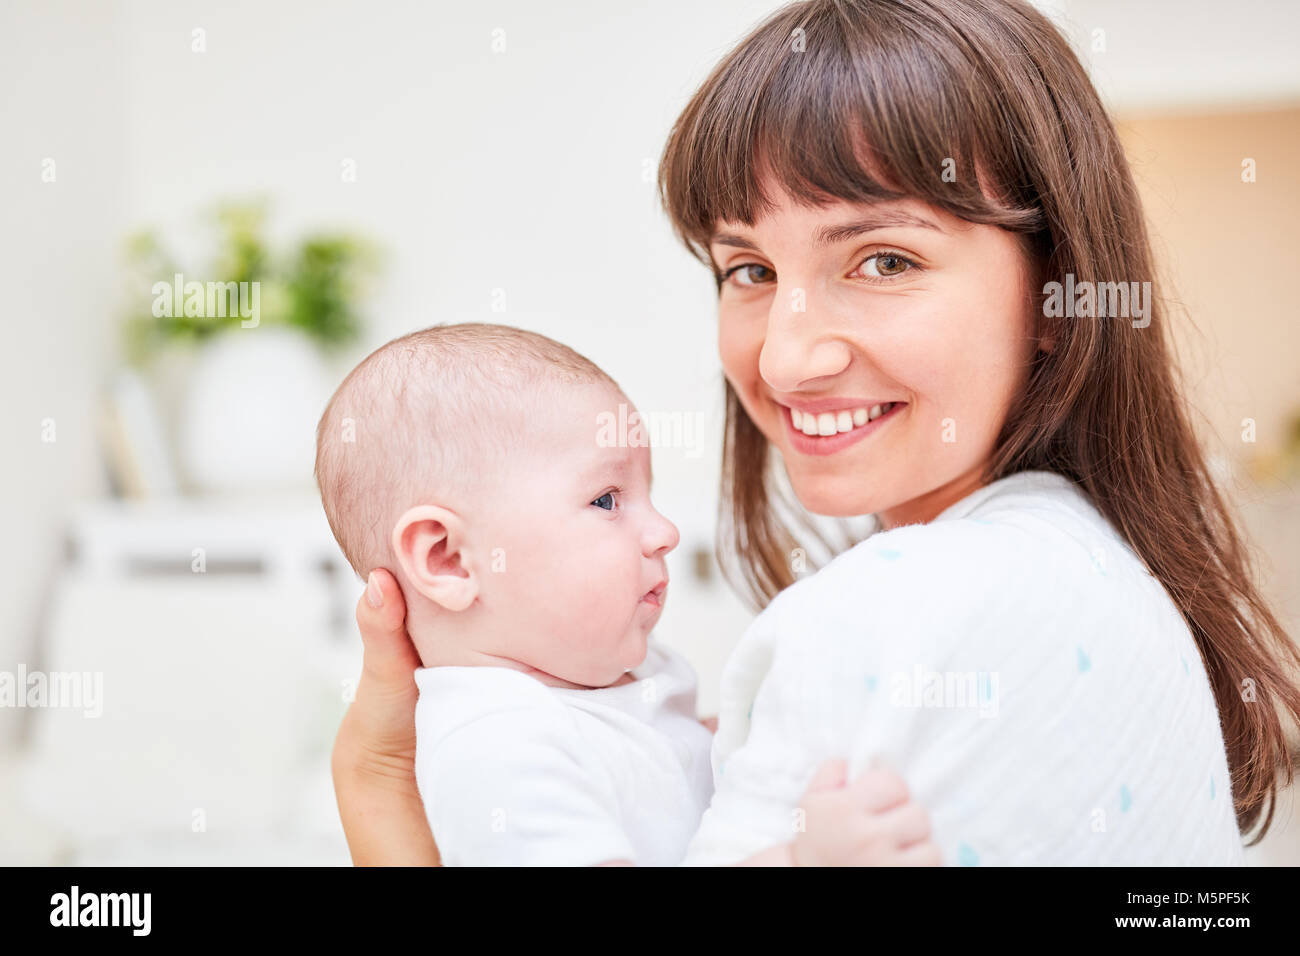 Young woman as a happy mother holds her newborn baby in her arms Stock Photo